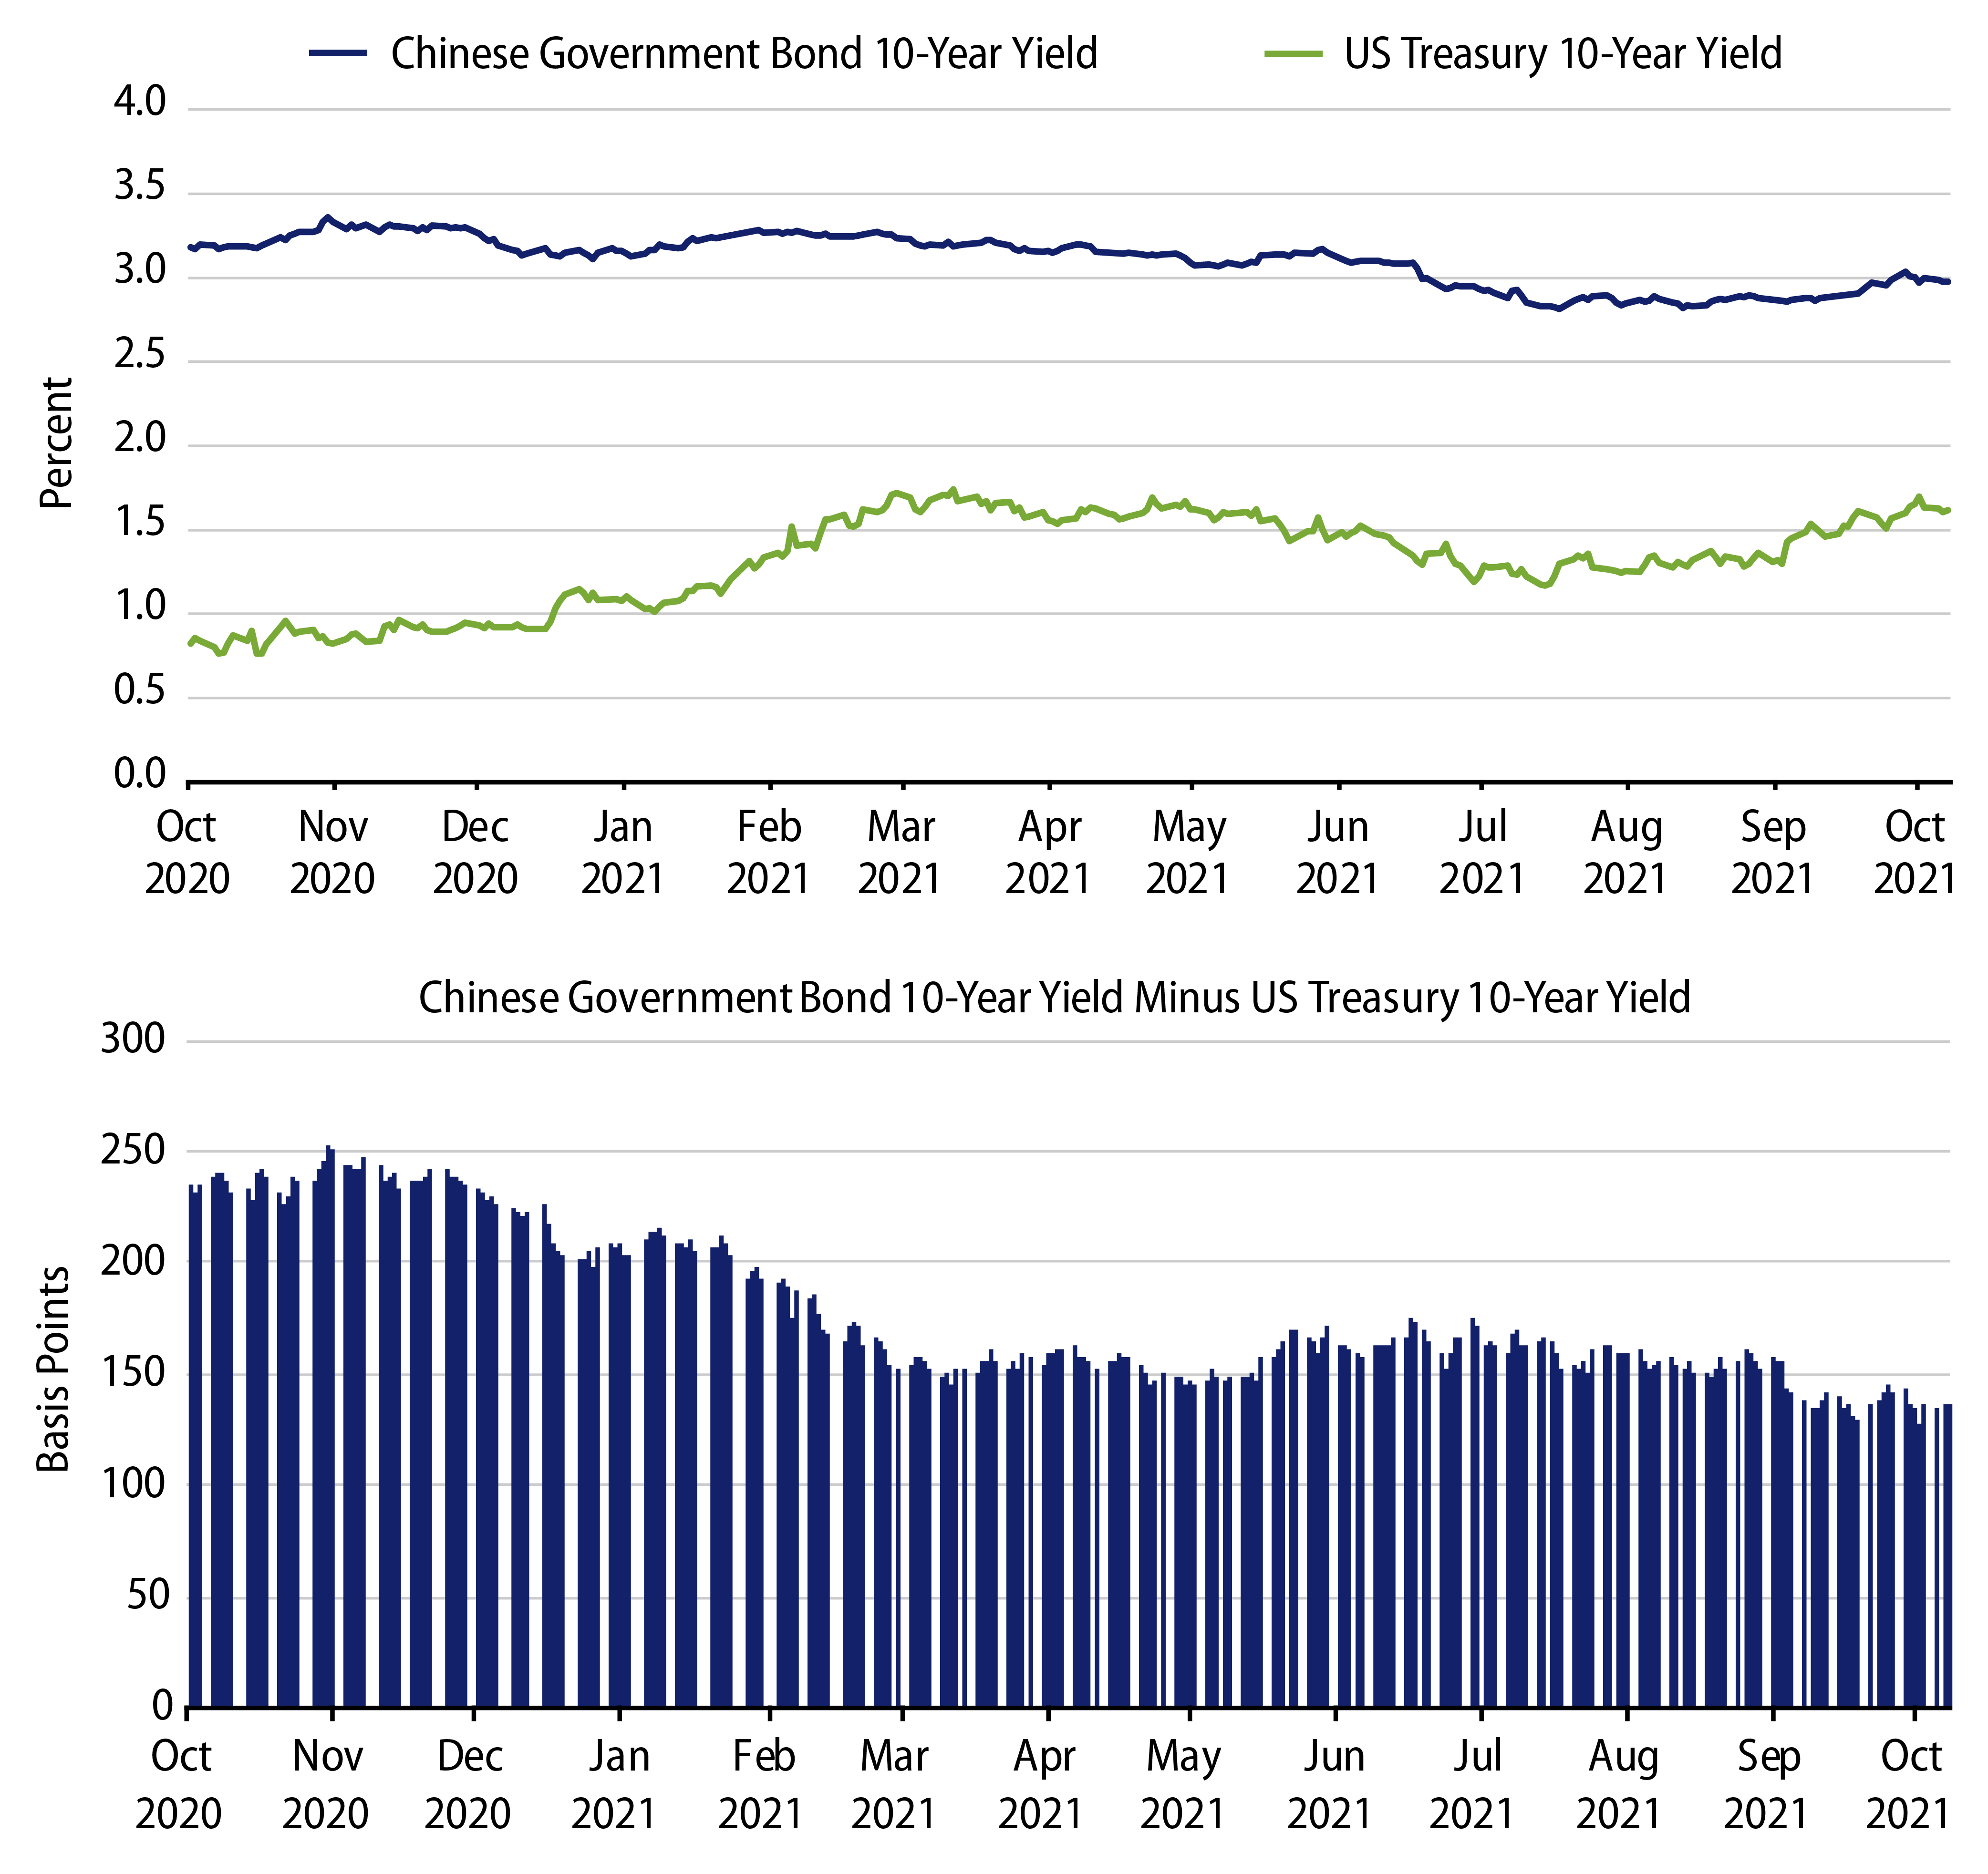 Chinese Government Bond Yields Have Decoupled from the Rise in US Treasuries